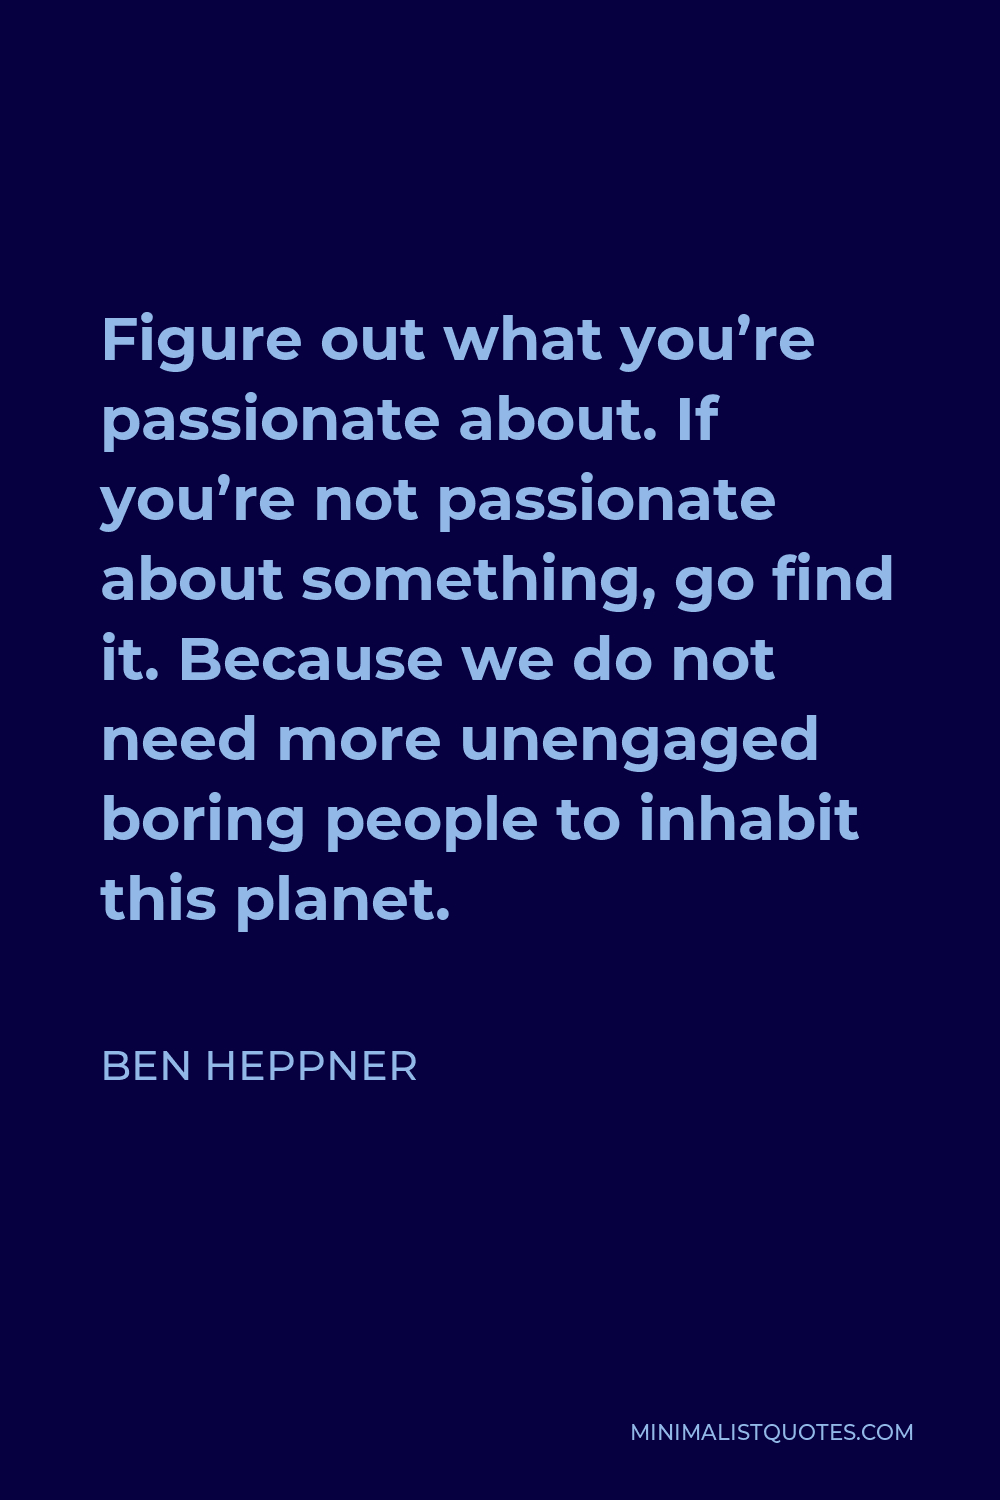 Ben Heppner Quote - Figure out what you’re passionate about. If you’re not passionate about something, go find it. Because we do not need more unengaged boring people to inhabit this planet.